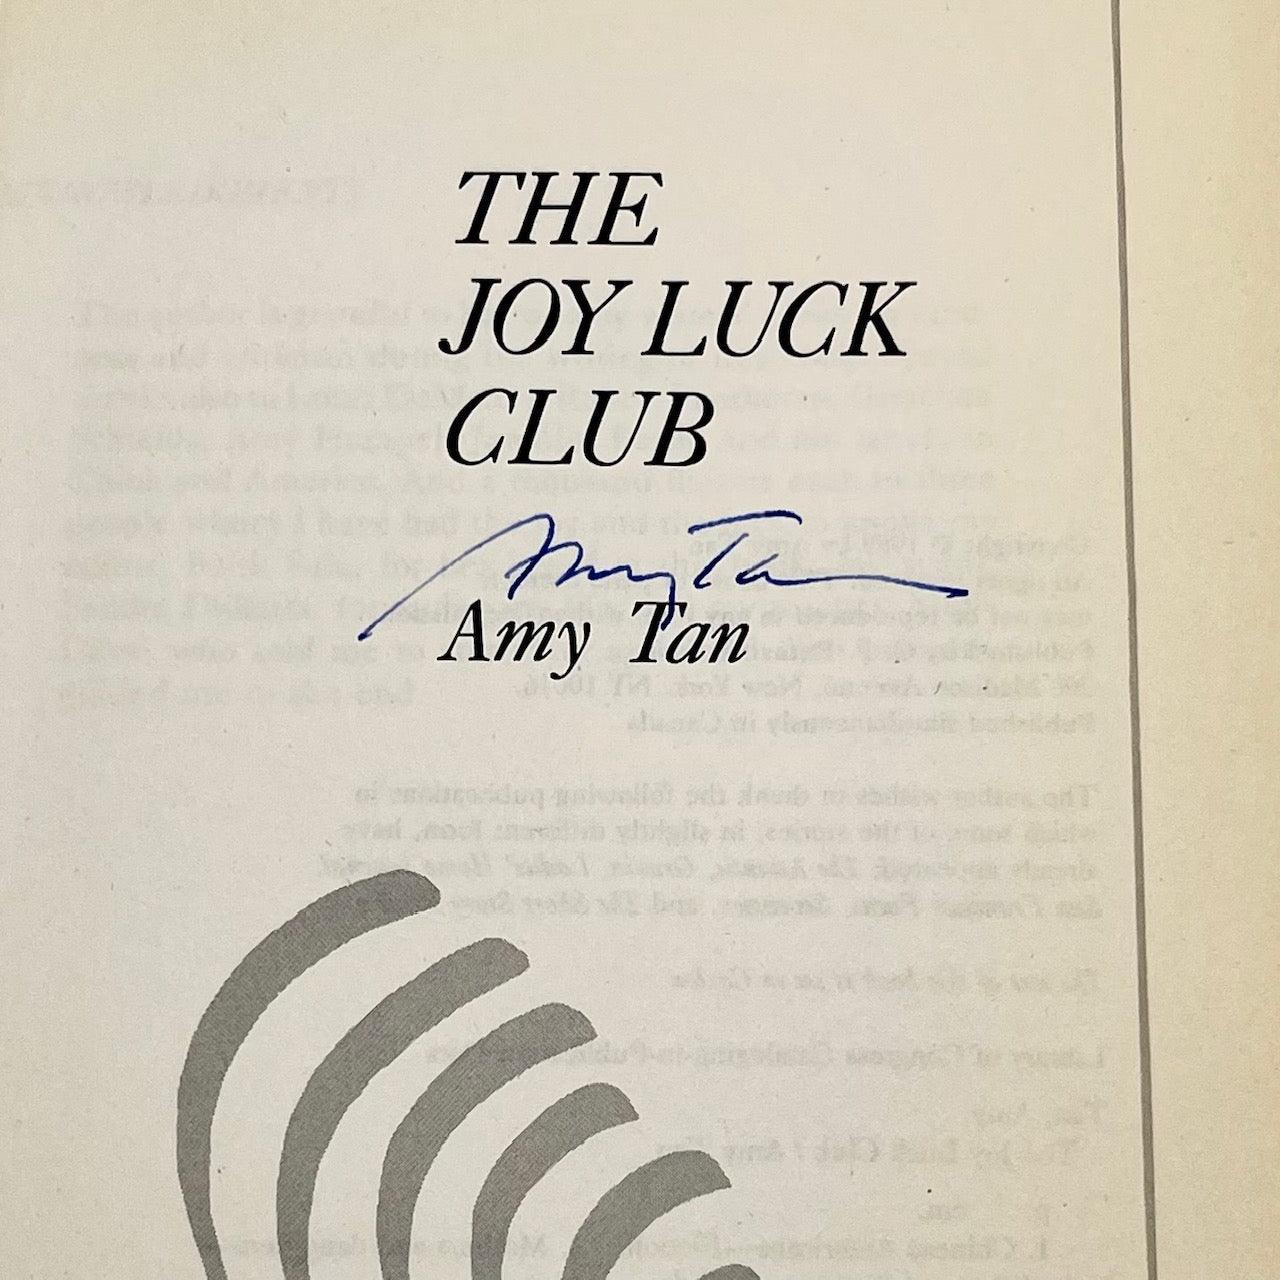 The Joy Luck Club (signed by Amy Tan) - Grinning Cat Books - LITERATURE - 